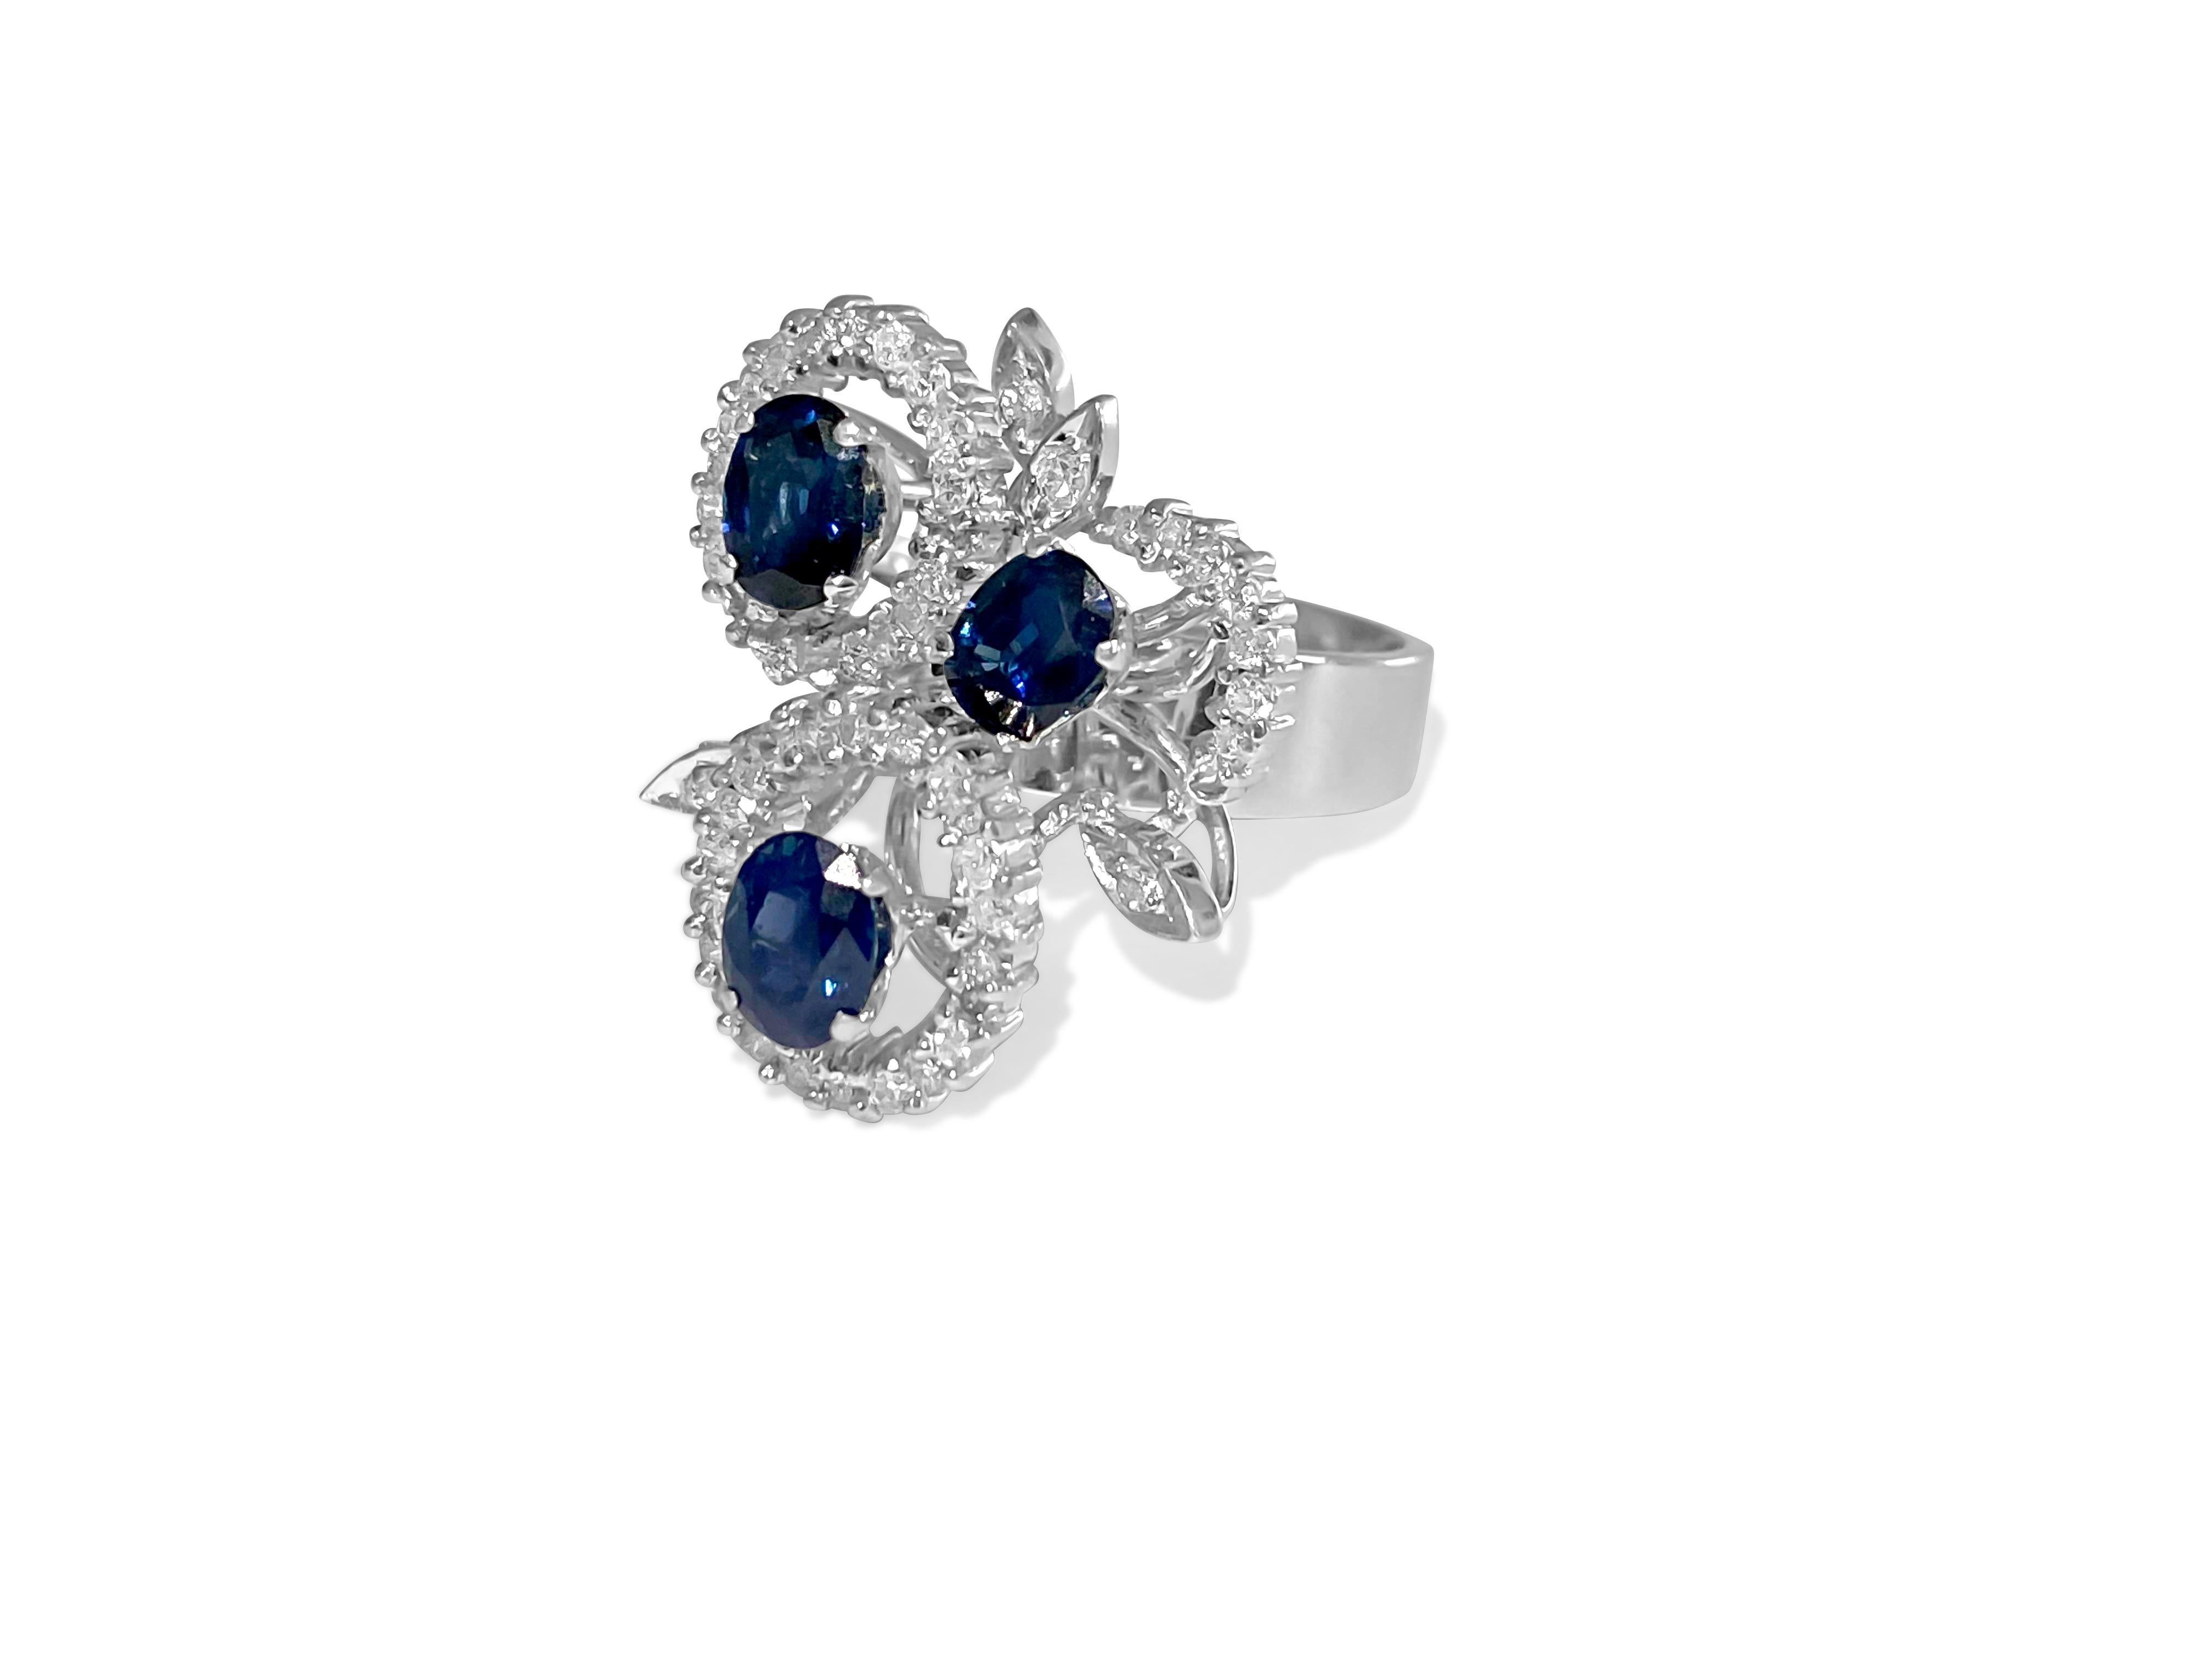 Metal: 18K white gold. 

1.25 carat diamonds total. VS-SI clarity and F-G color. Round brilliant cut diamonds set in prongs. 100% natural earth mined and genuine diamonds. 

Blue Sapphire: 1.25 carat blue sapphire. Oval cut cornblue sapphires. 100%